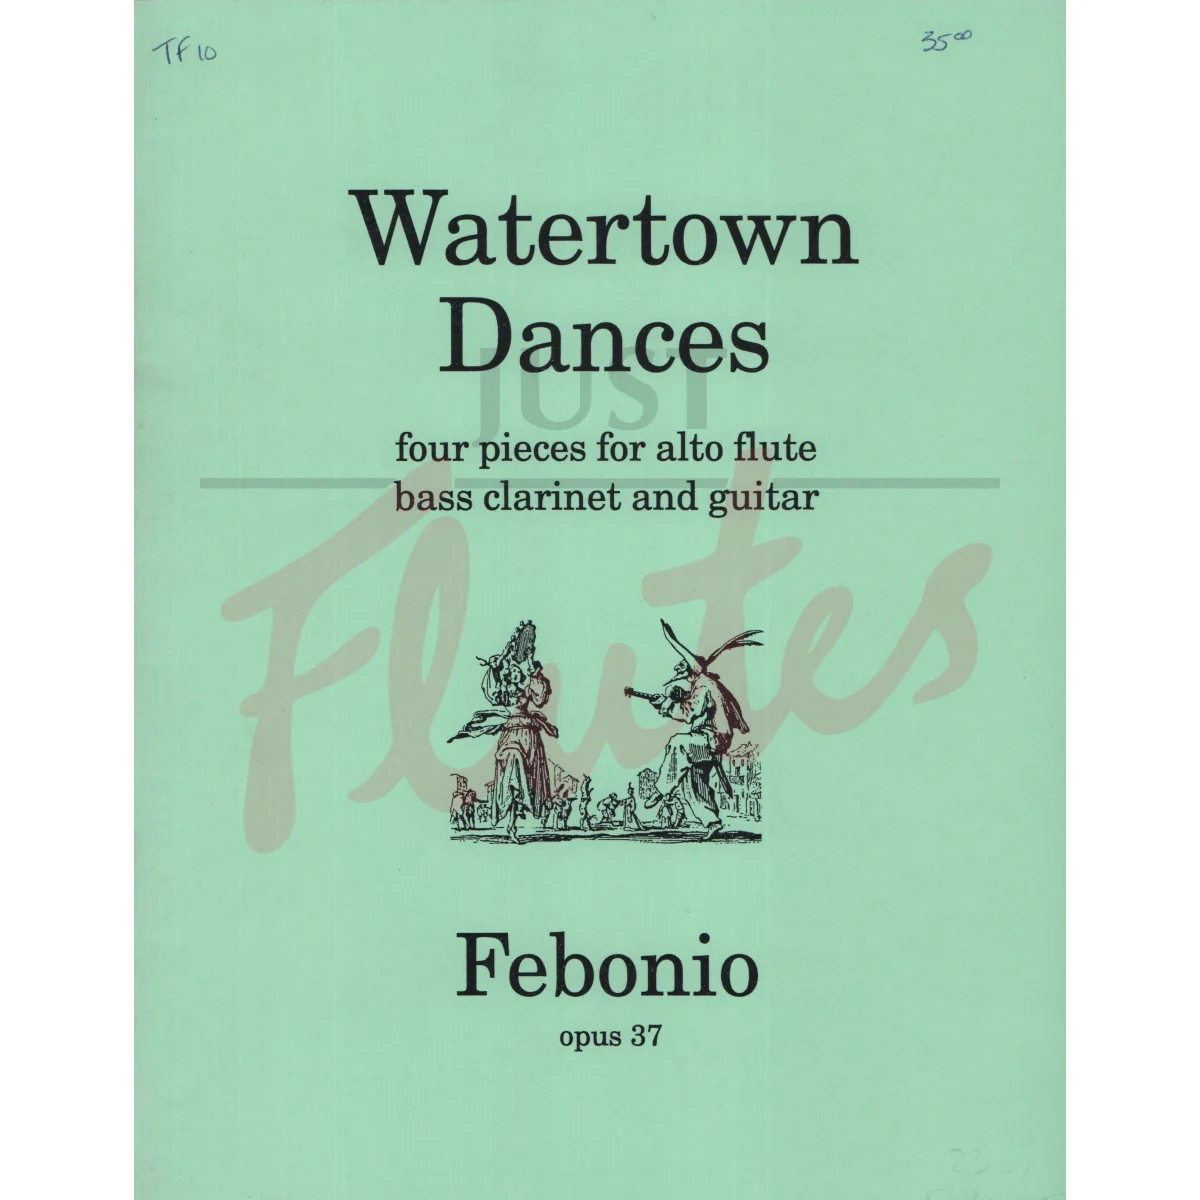 Watertown Dances for Alto Flute, Bass Clarinet and Guitar